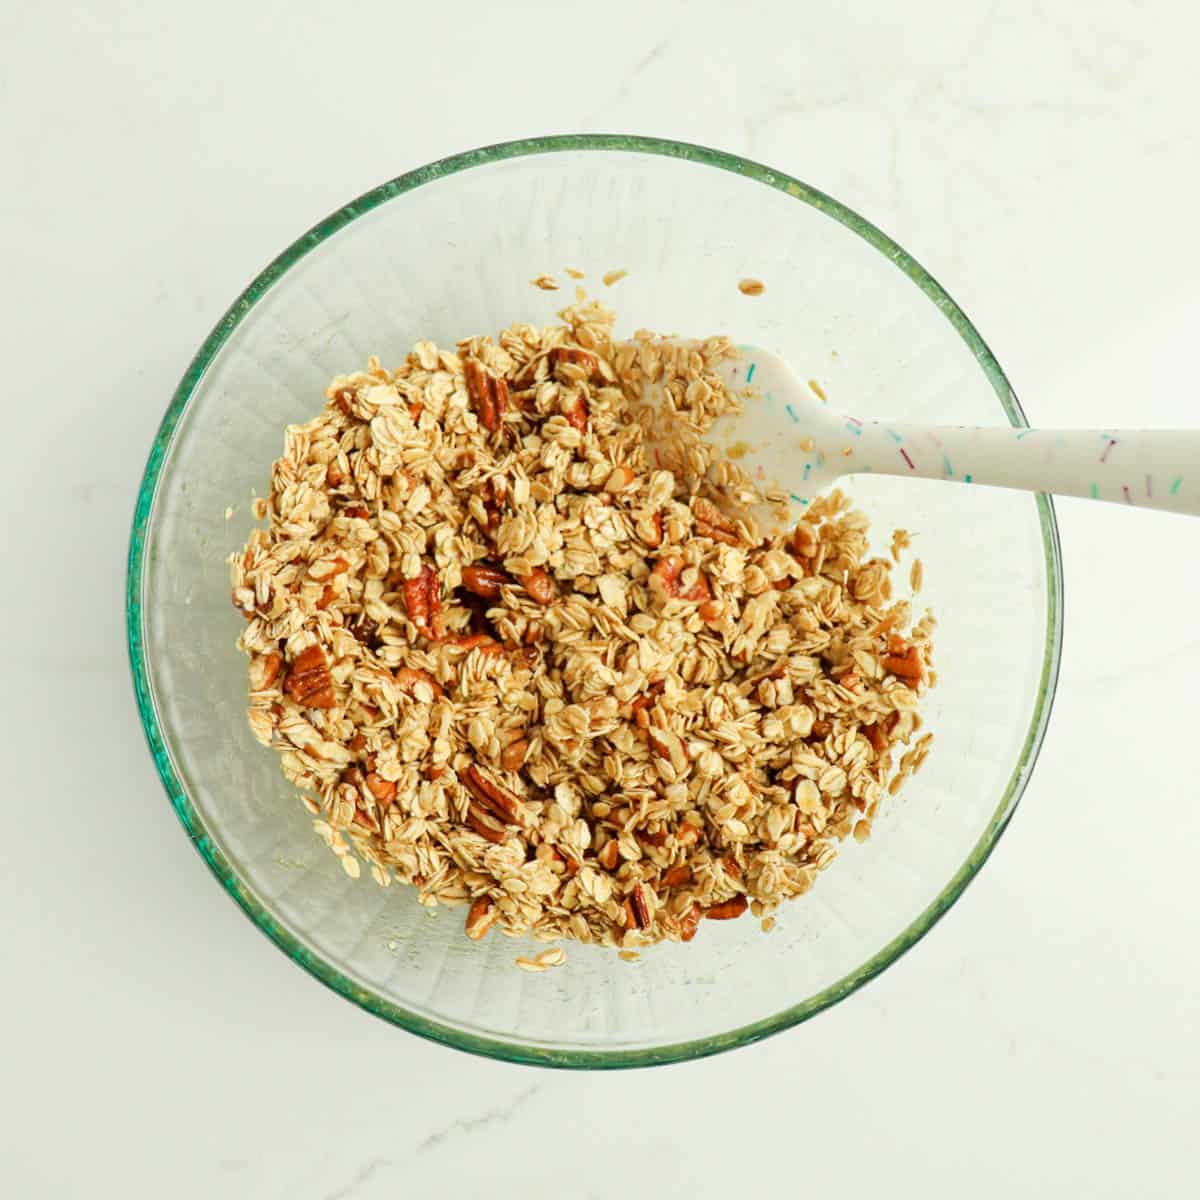 Combined granola mixture in a bowl.